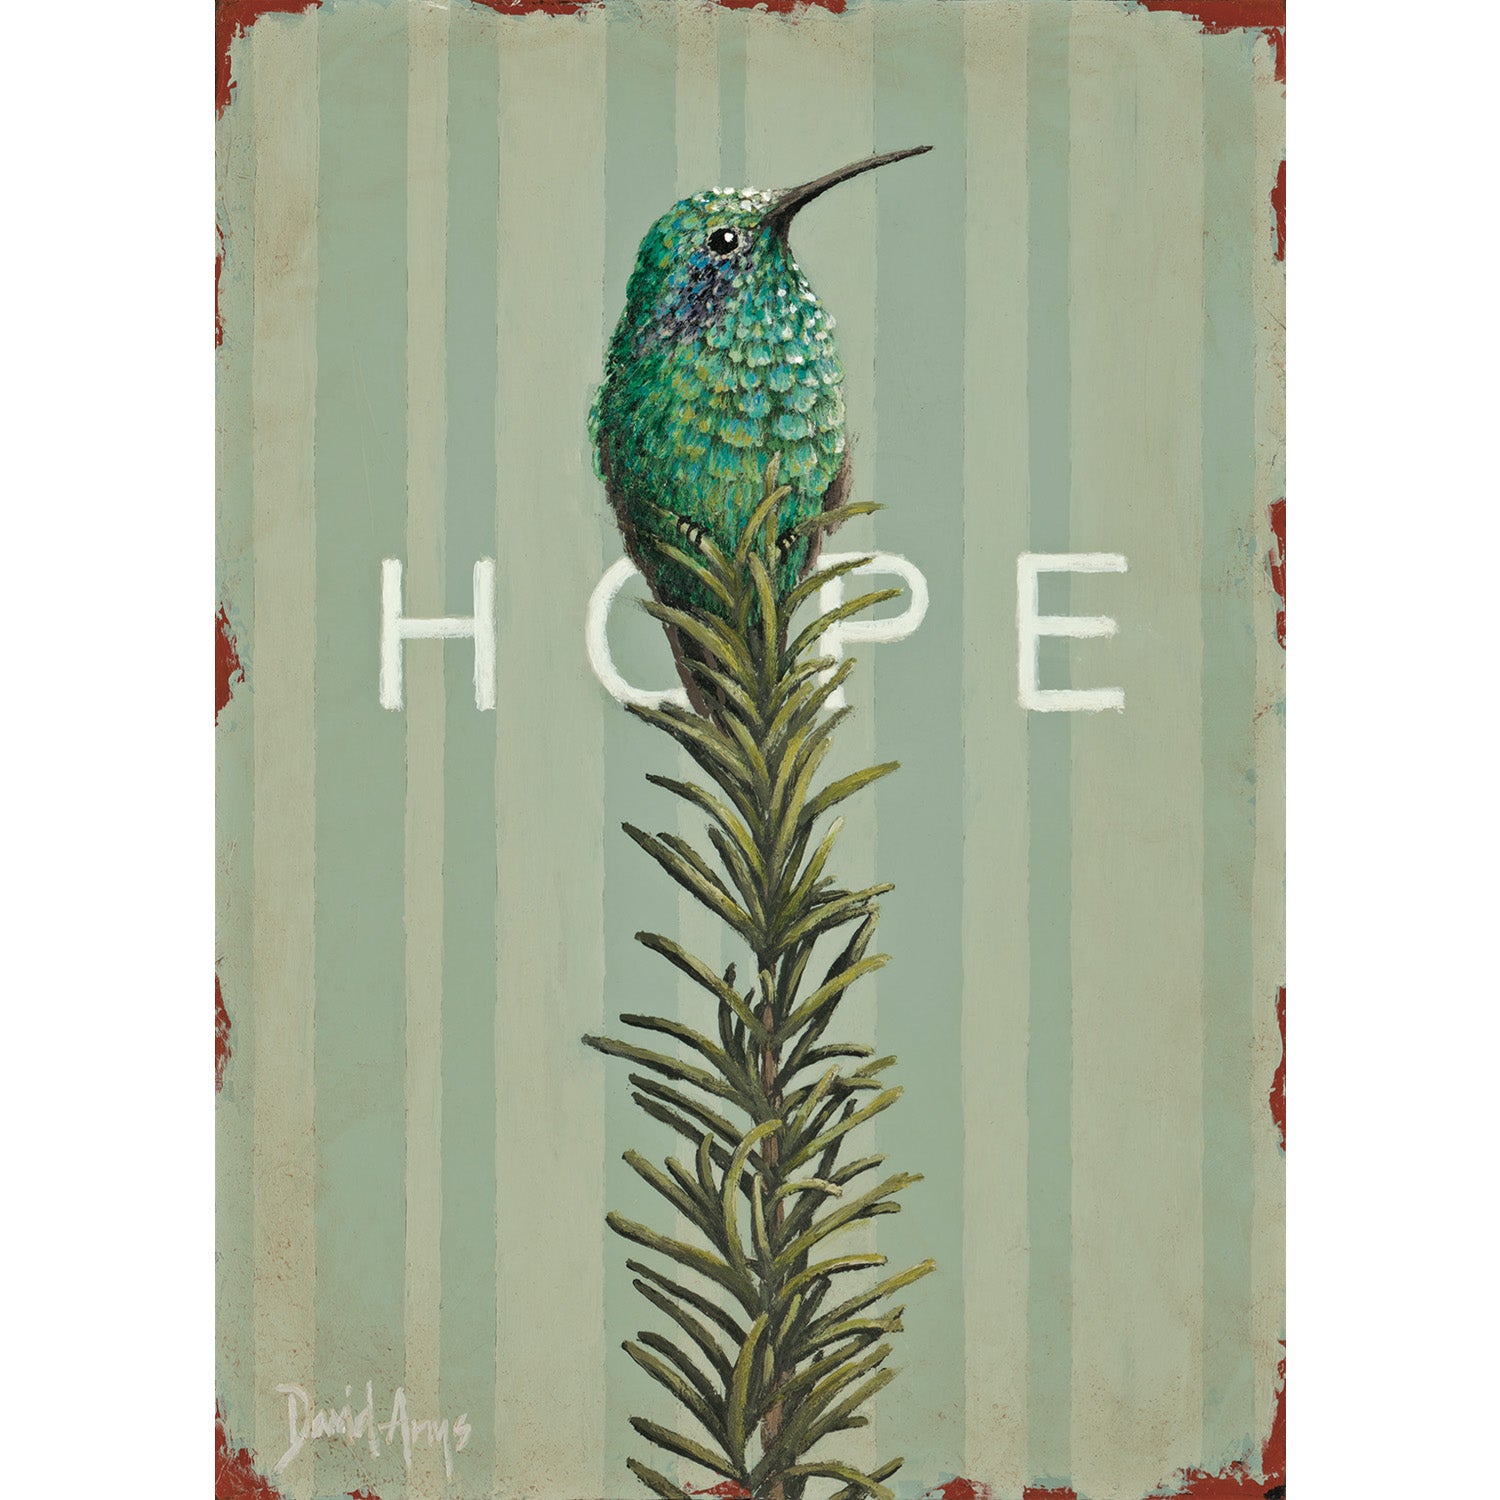 A hummingbird sitting on top of a plant, surrounded by the word Hope (Rosemary) Card and created by artist David Arms.